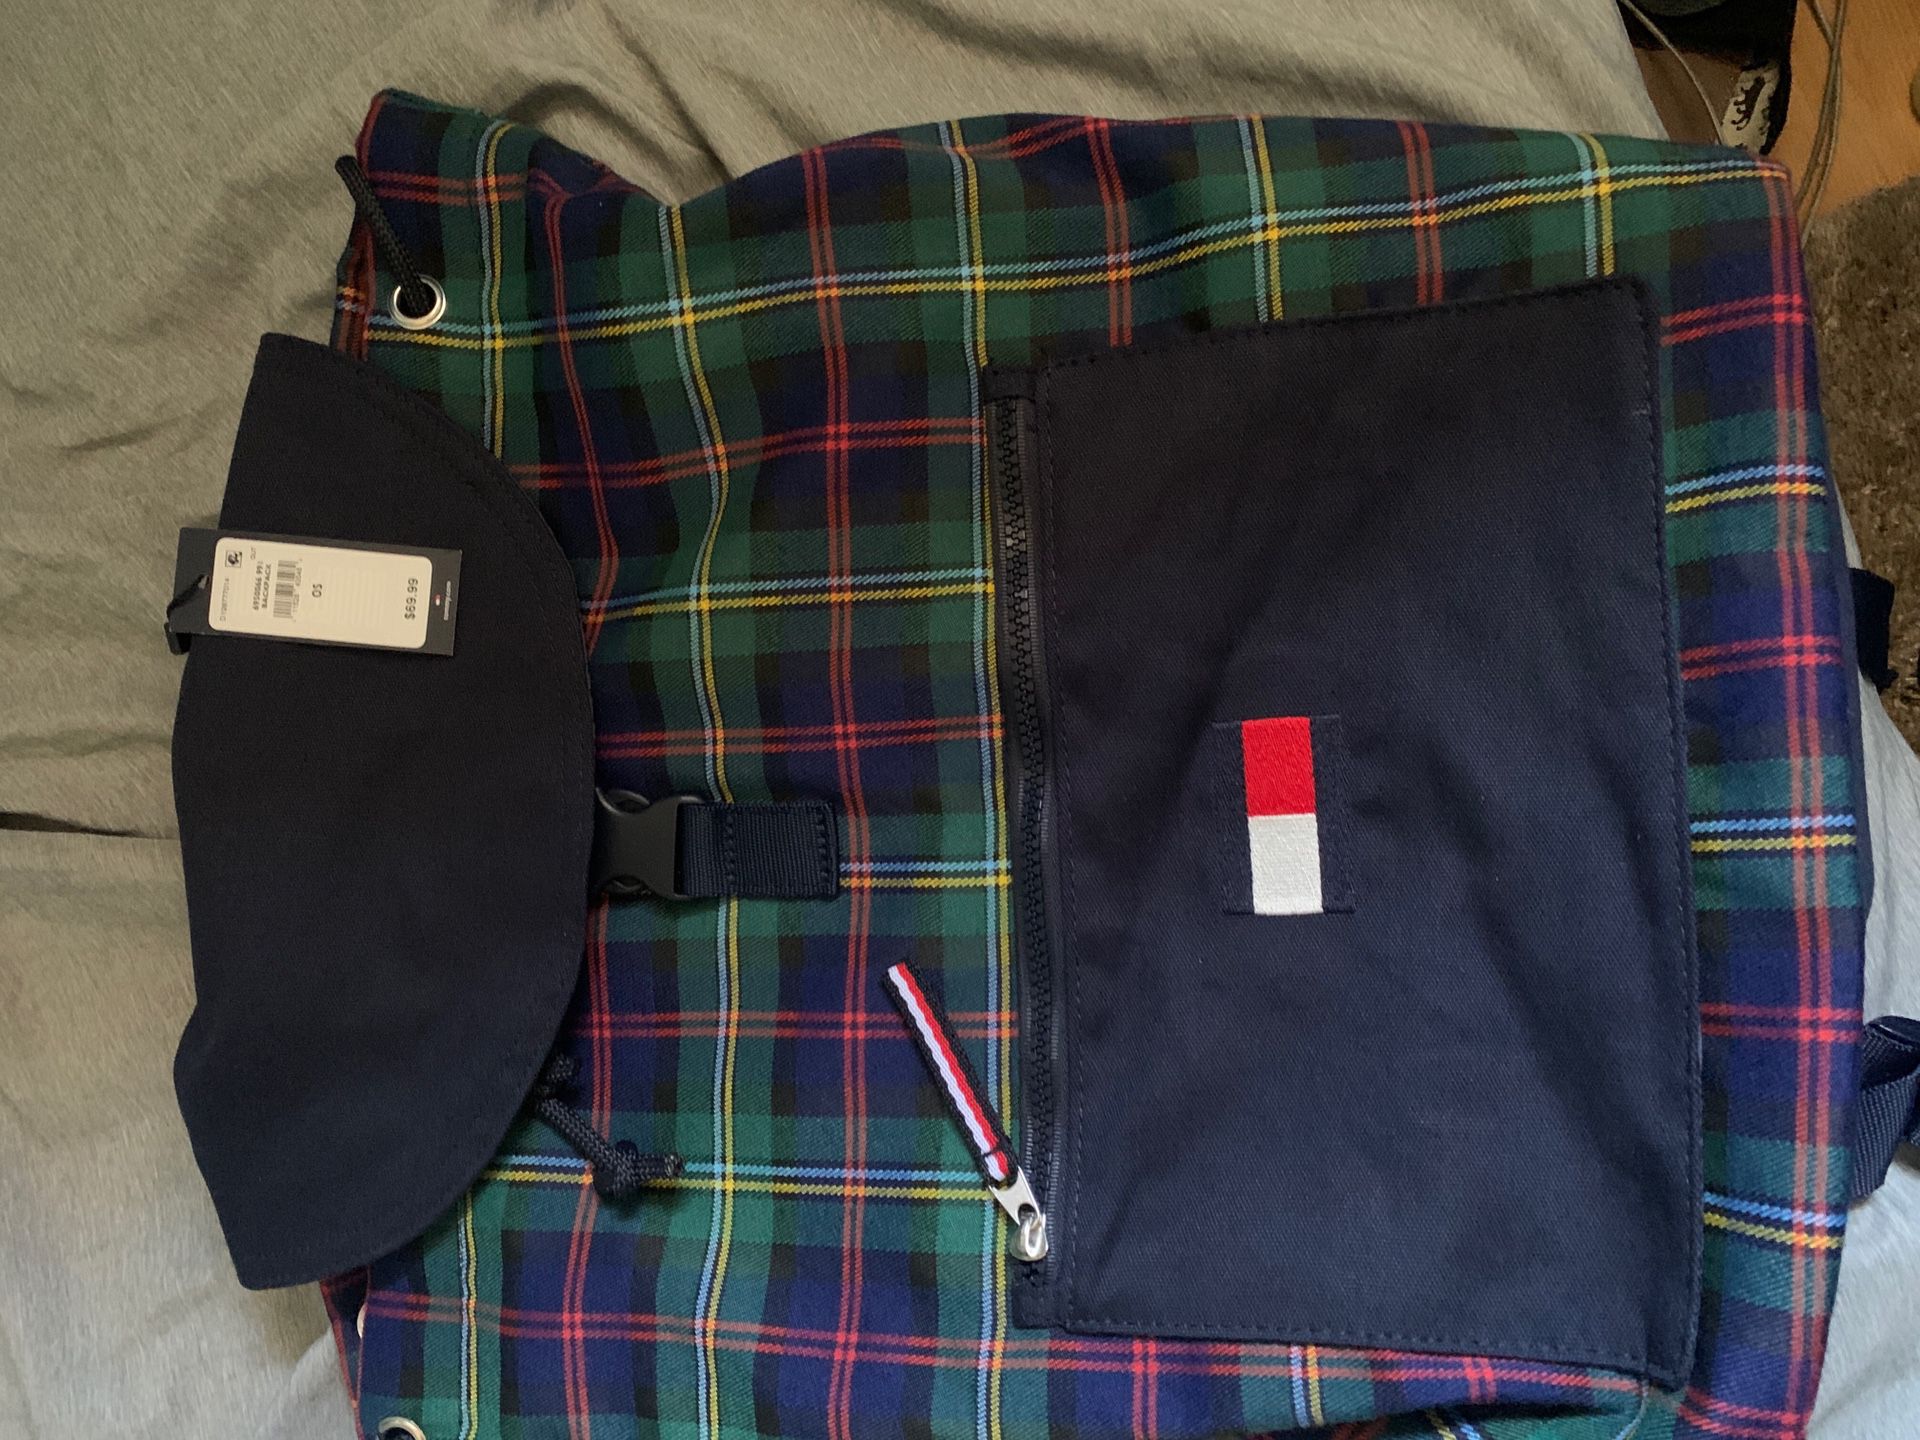 Tommy Hilfiger bags